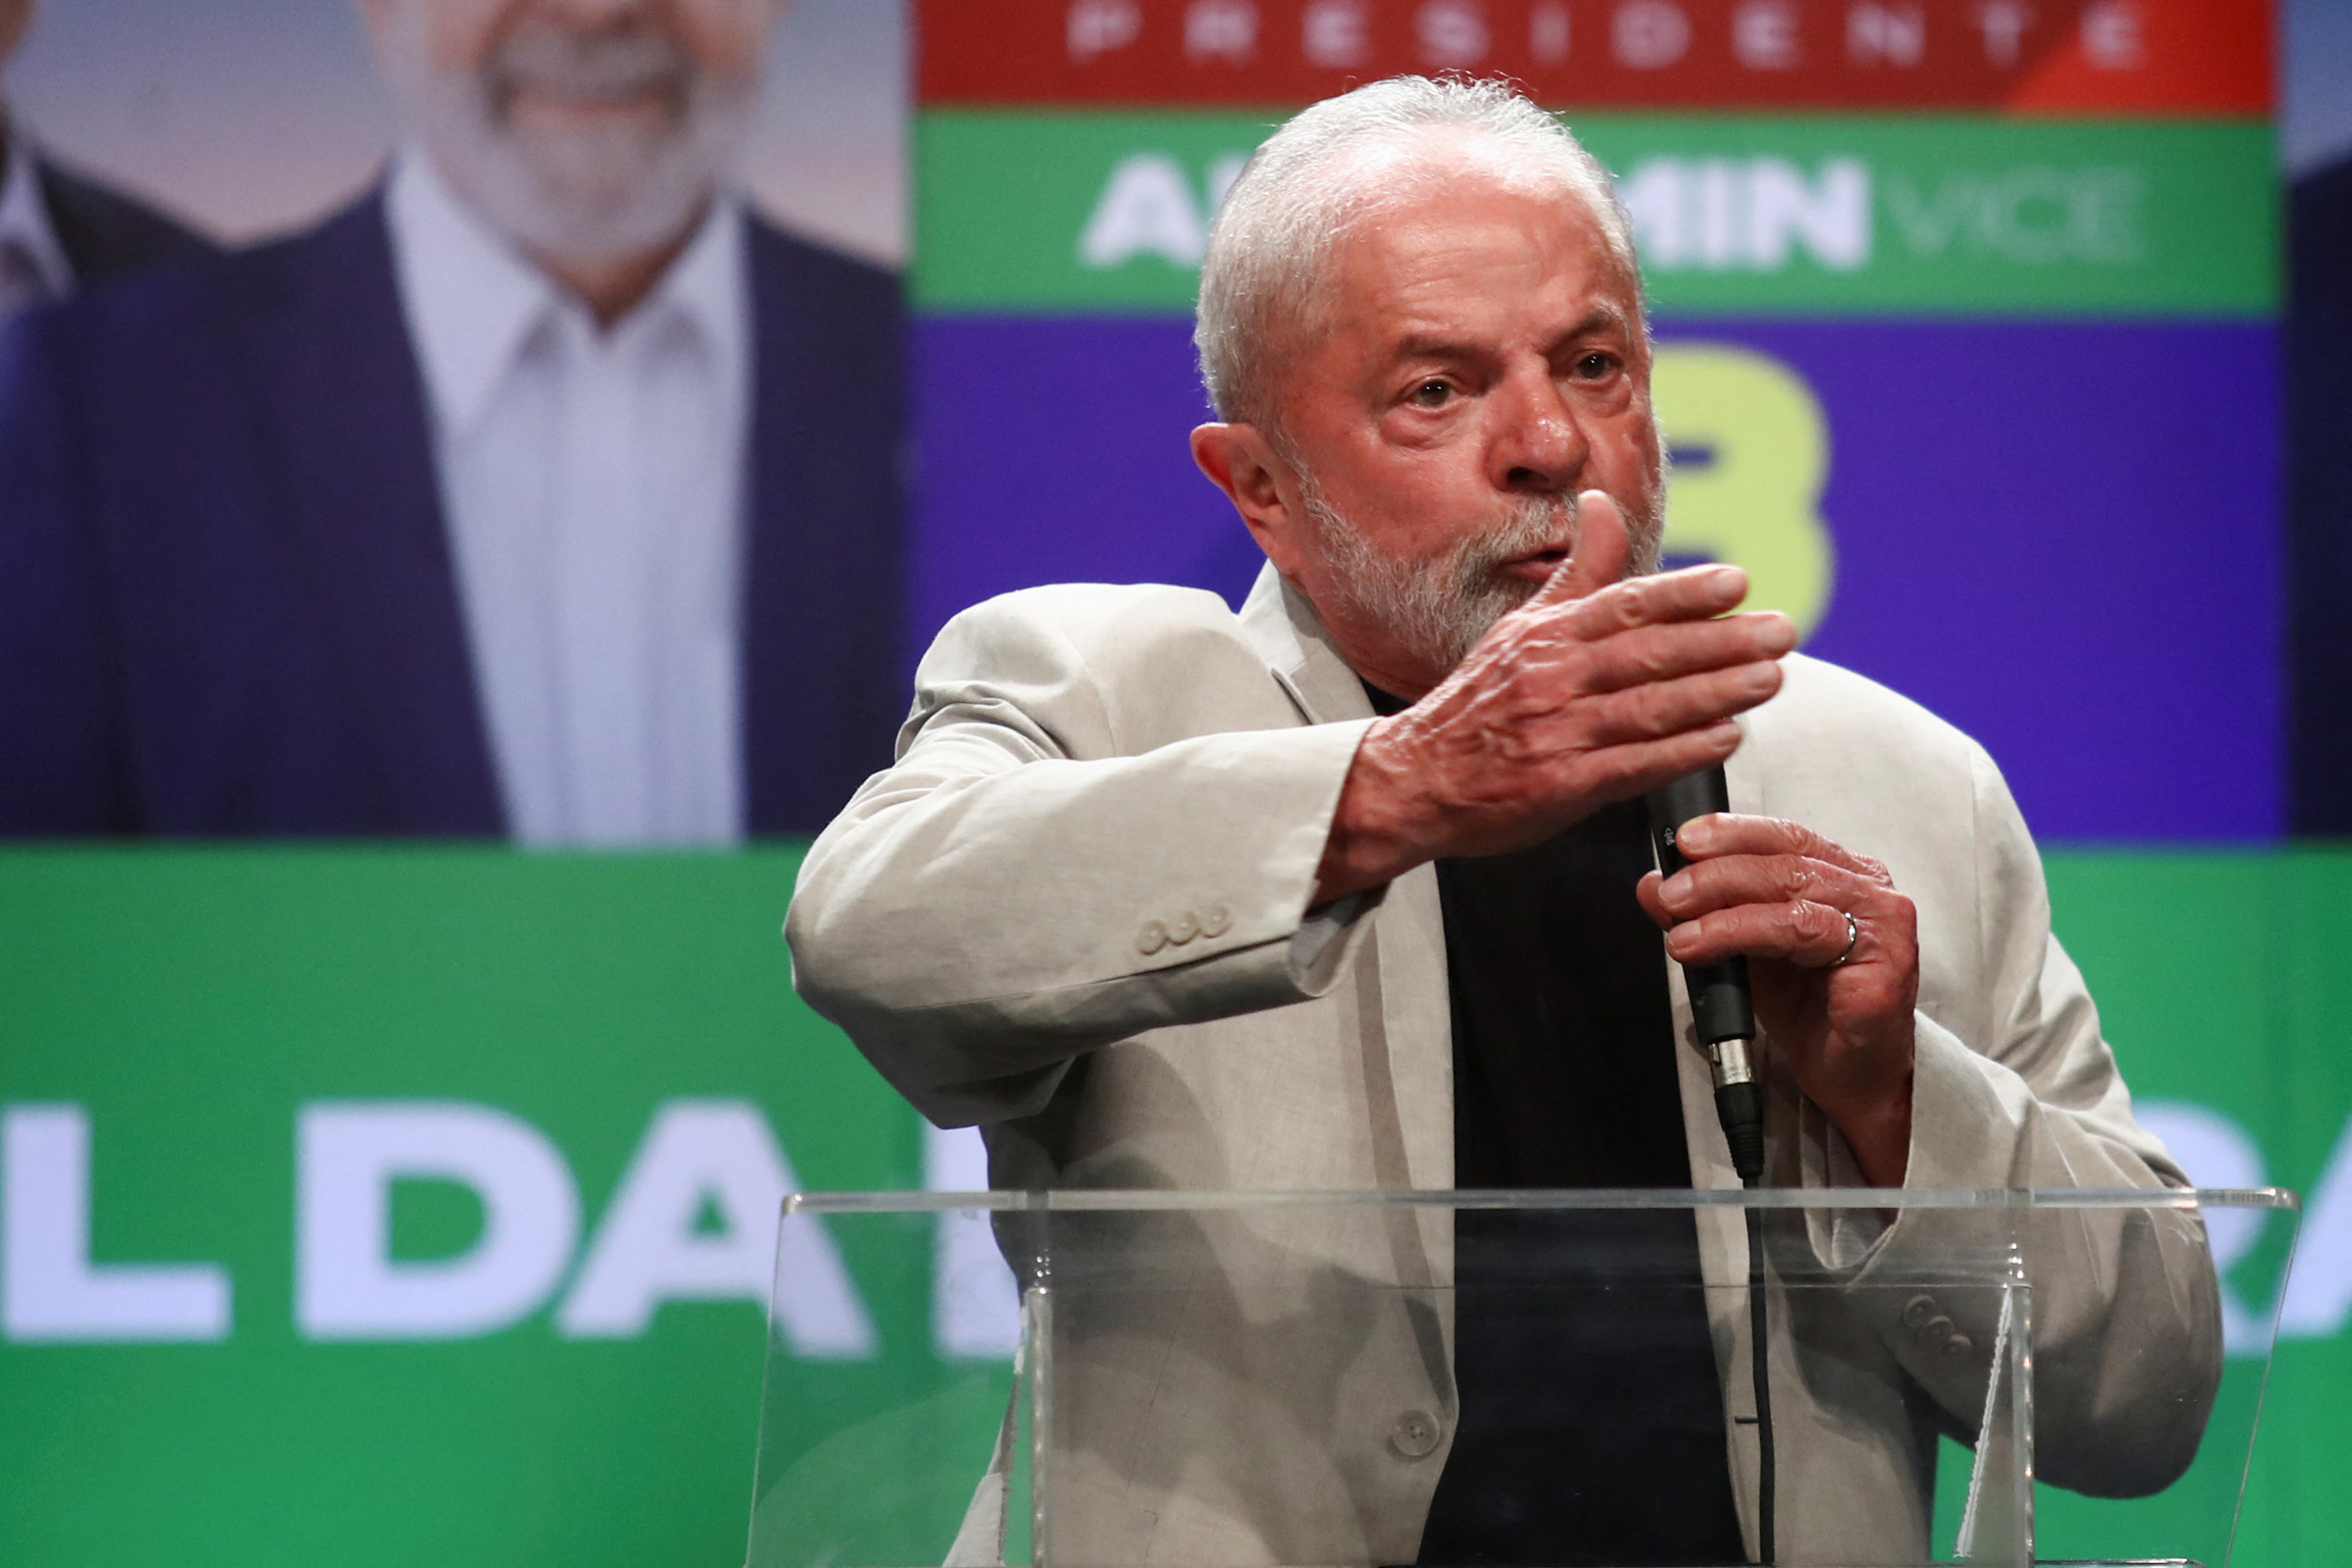 Lula da Silva: 'The second round will be the first opportunity to have a personal debate with Bolsonaro' REUTERS/Carla Carniel